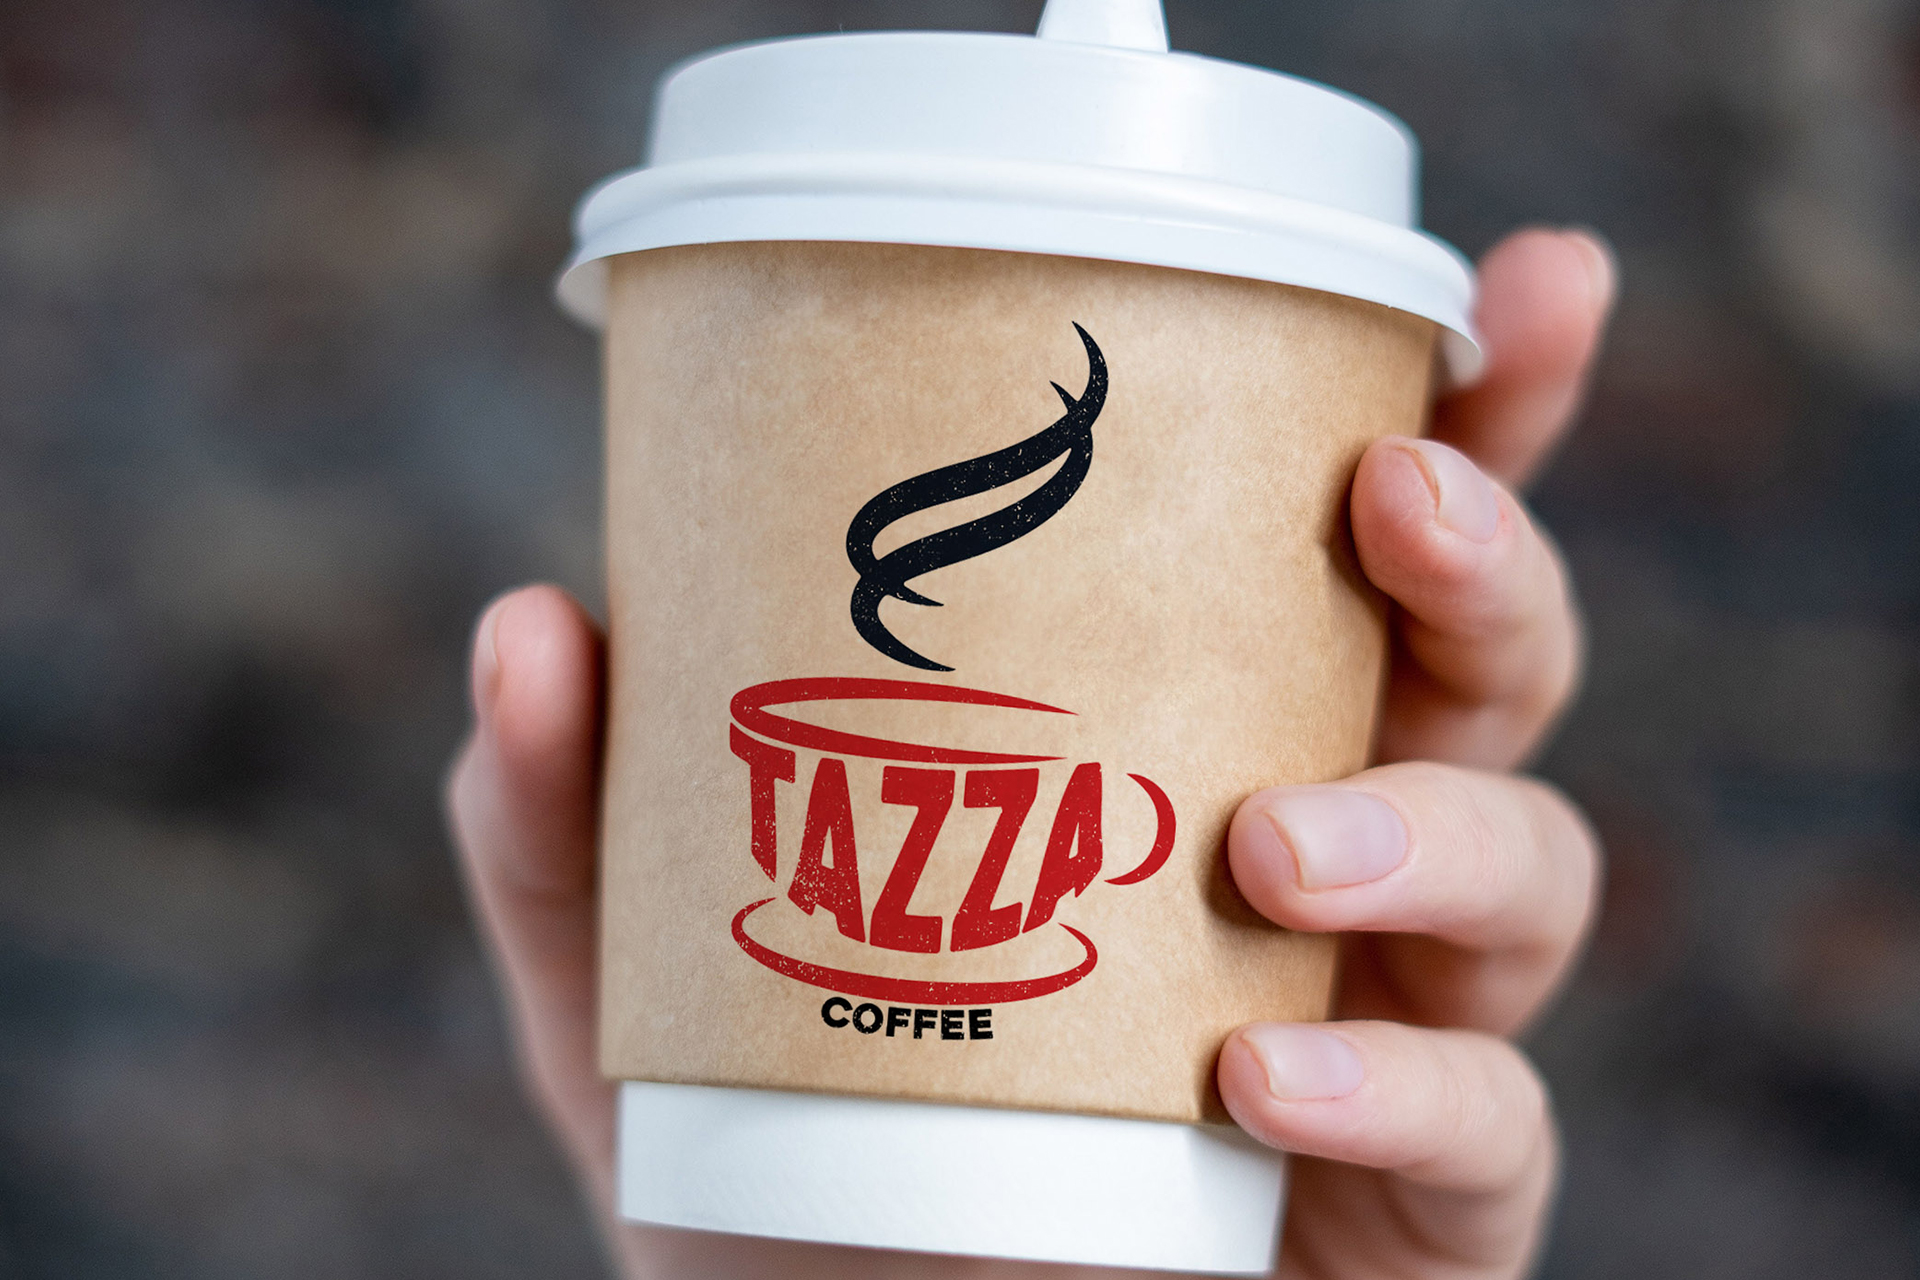 Hand holding a disposable Tazza coffee cup